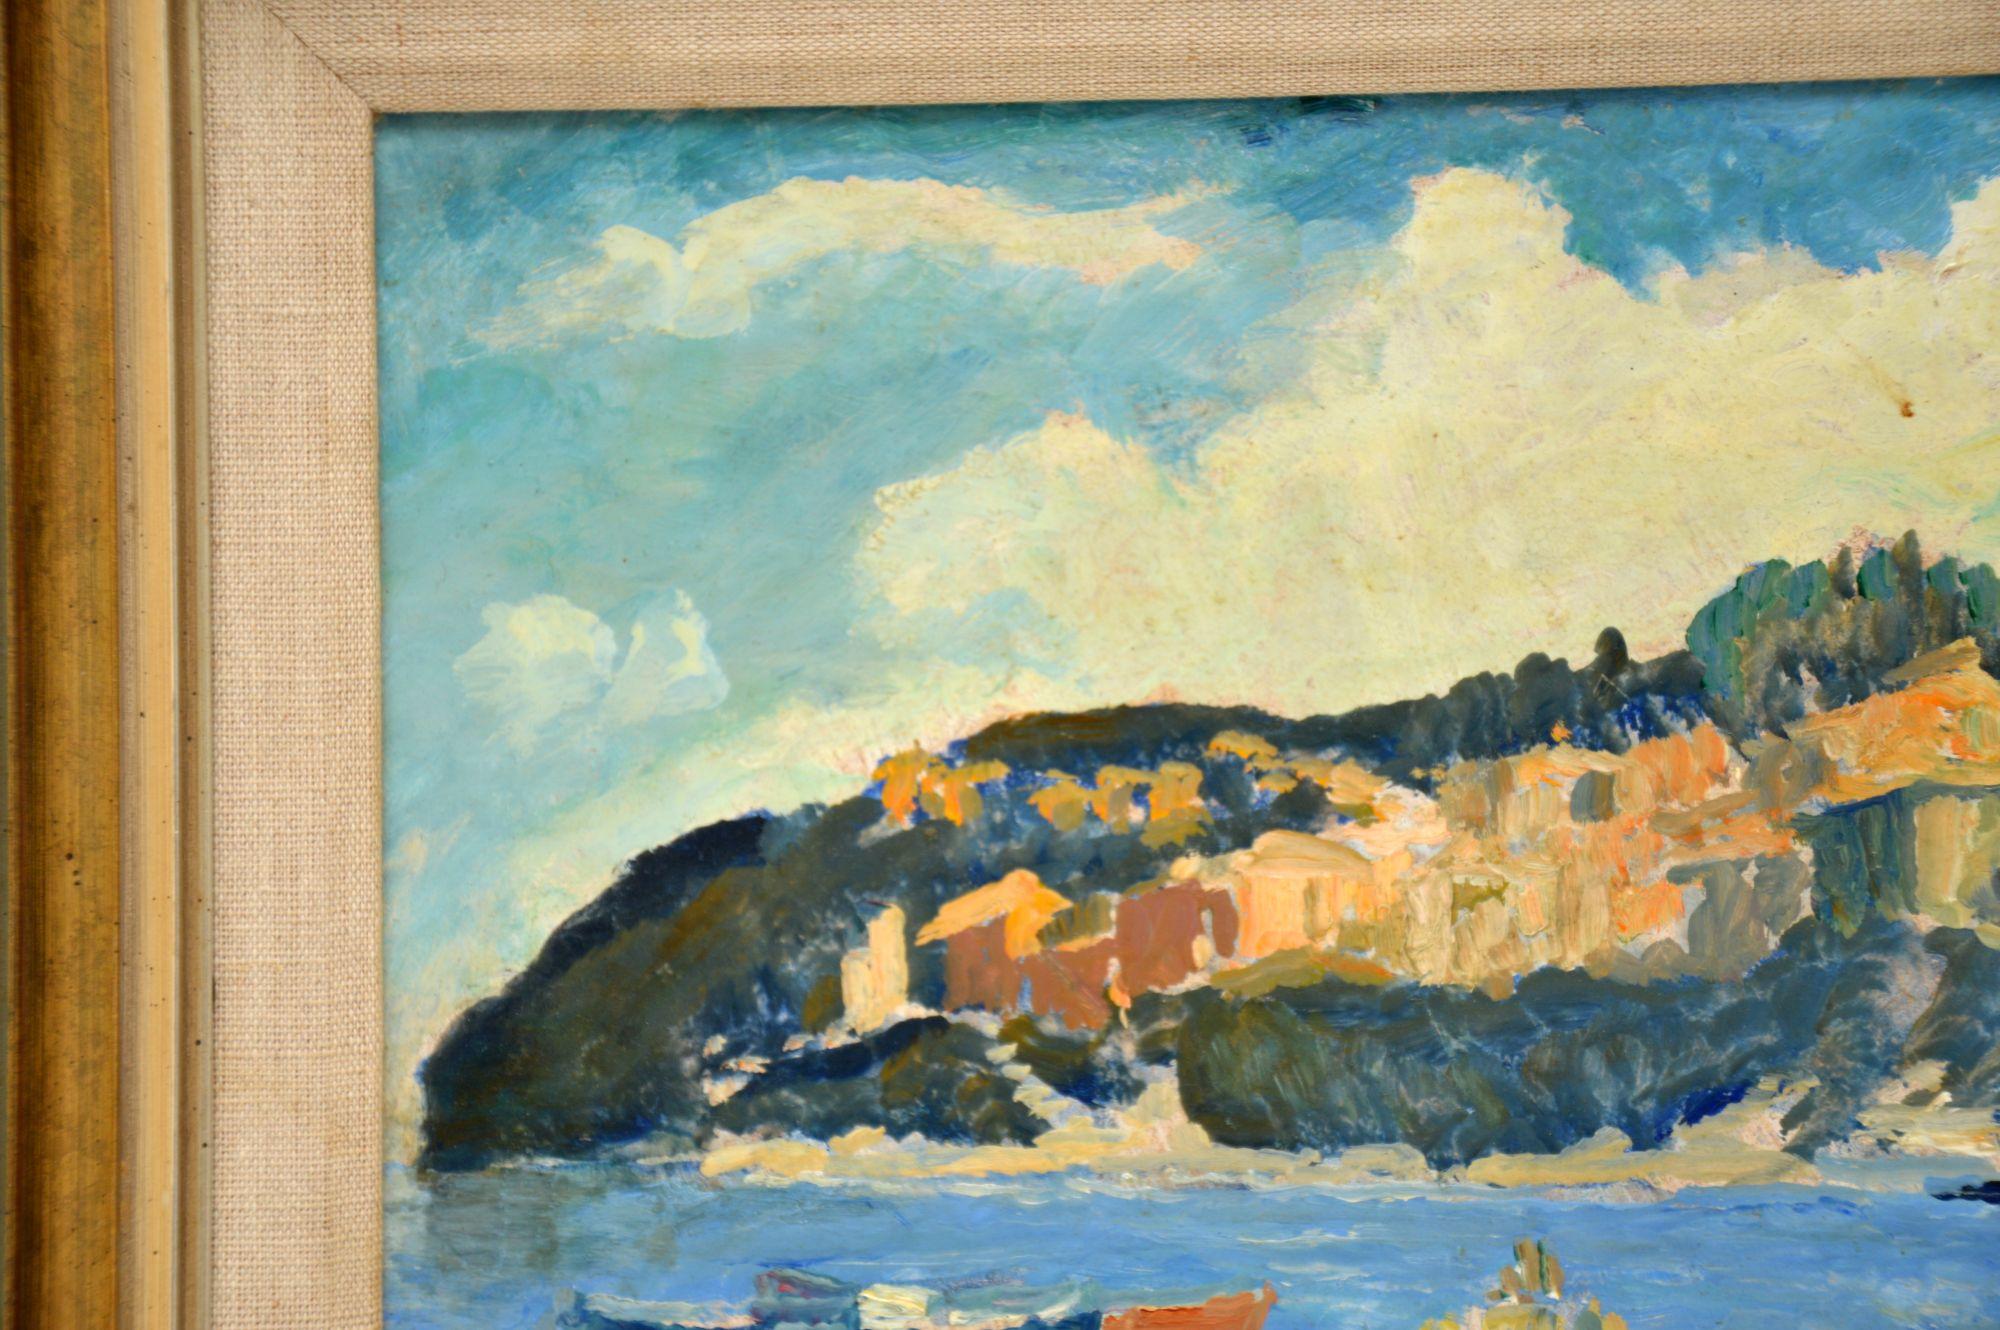 Vintage Oil Painting by Ronald Ossory Dunlop RA - Harbour Scene In Good Condition For Sale In London, GB